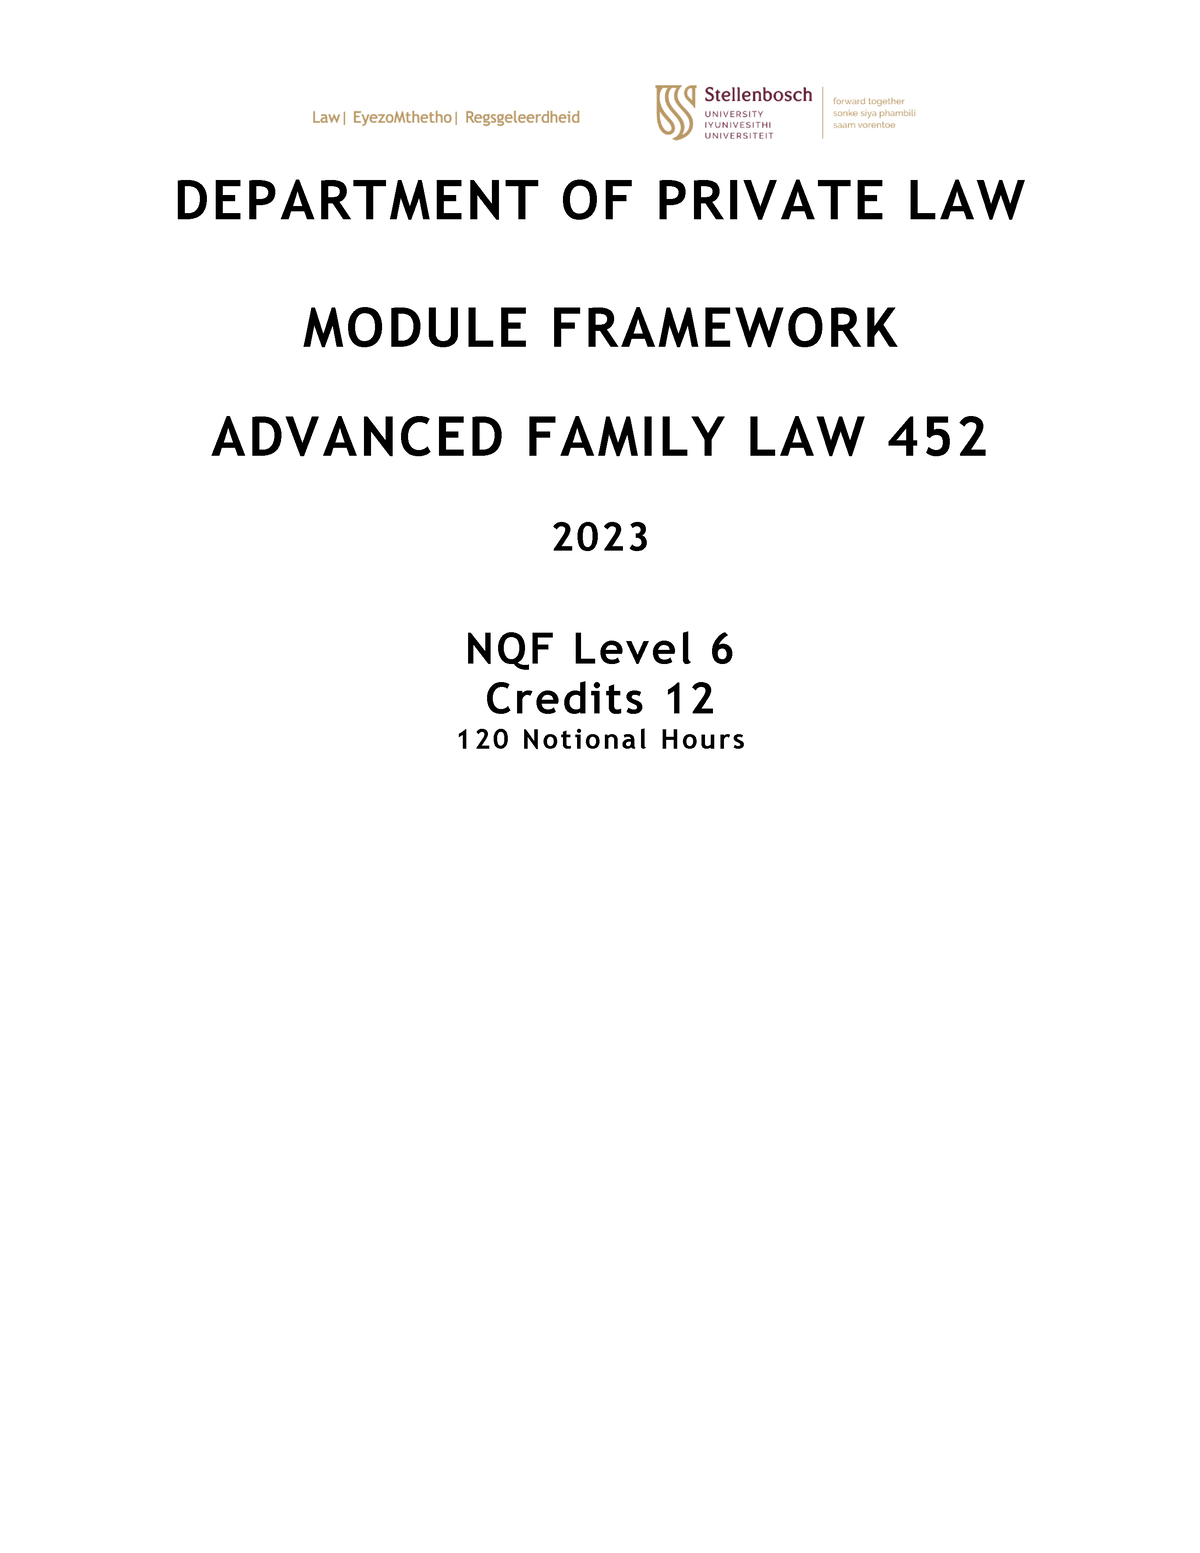 Advanced Family Law 452 Module Framework 2023 Final (BW comments